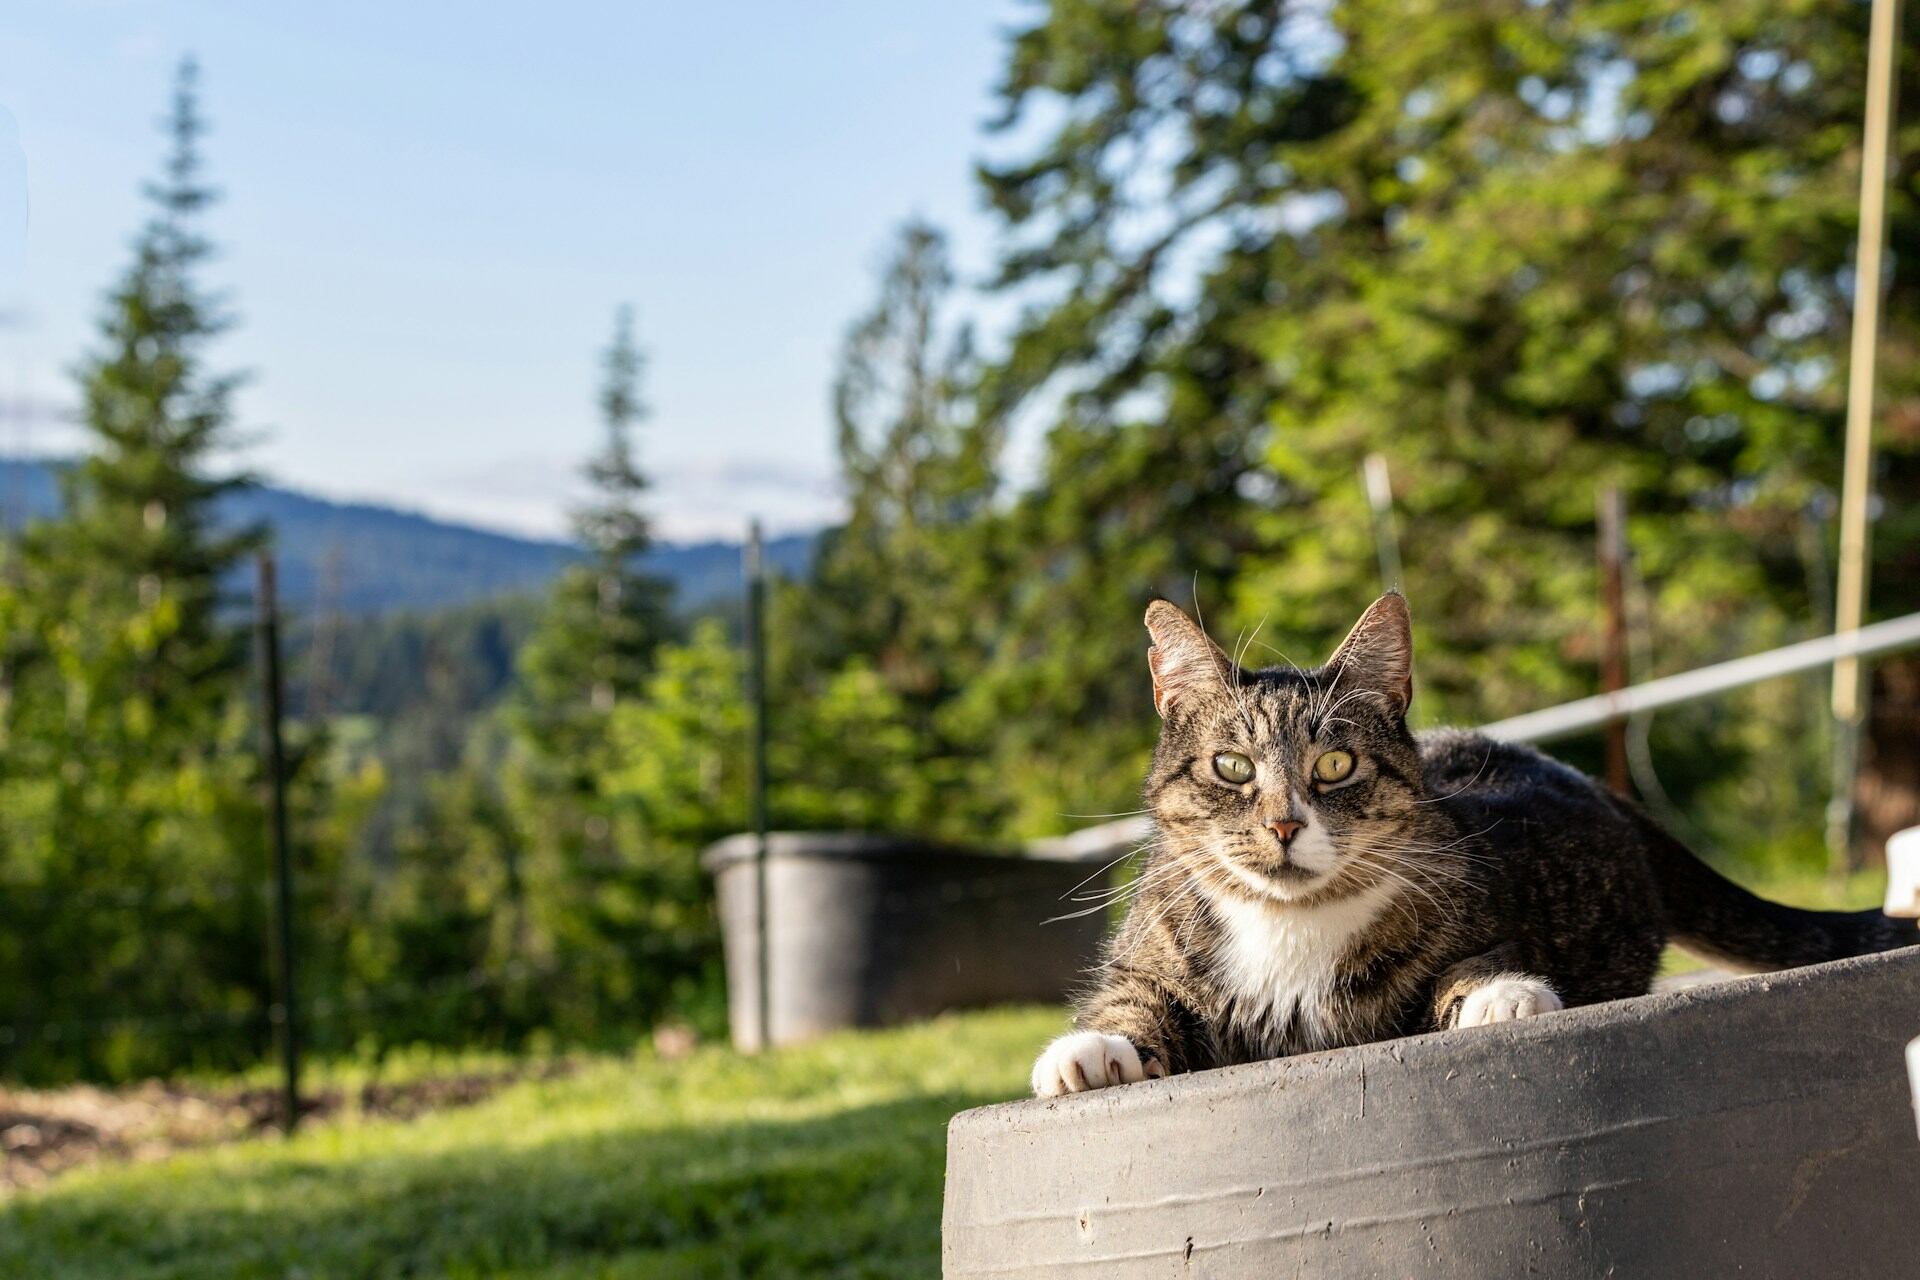 An outdoor cat sitting on a tire in a mountain forest